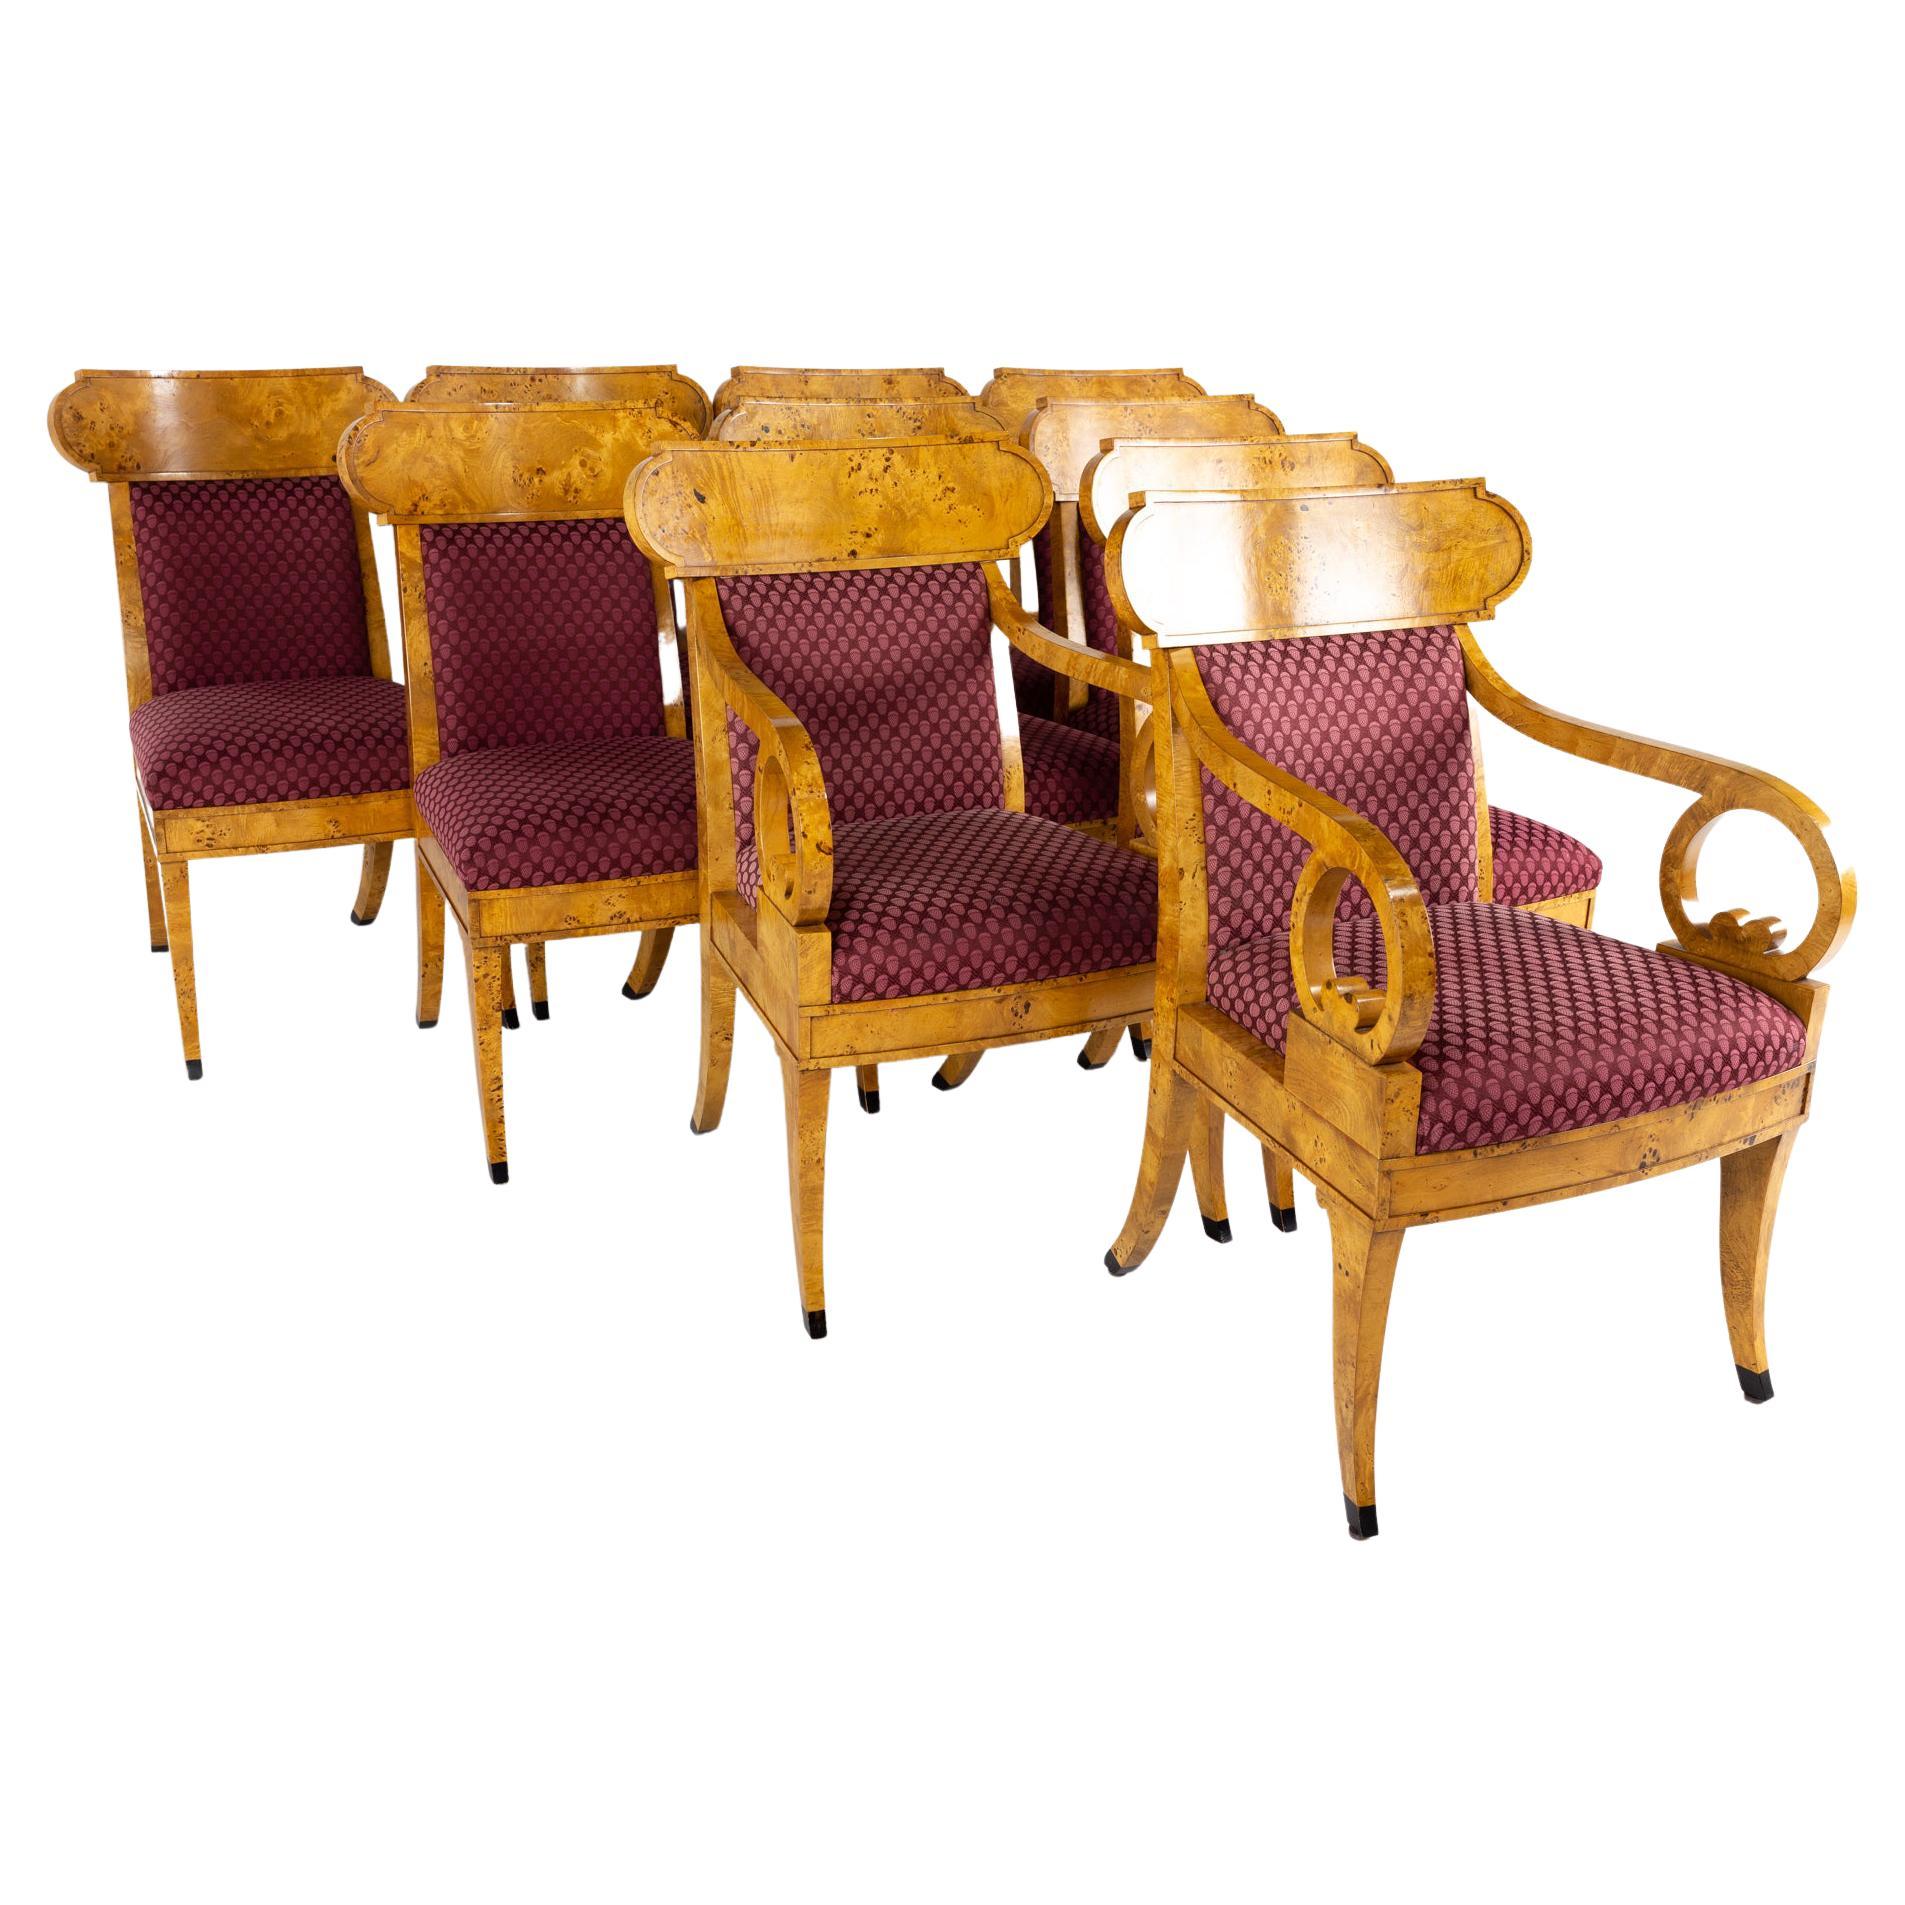 Baker Furniture Klismos Collection Neoclassical Burlwood Chairs, Set of 10 For Sale